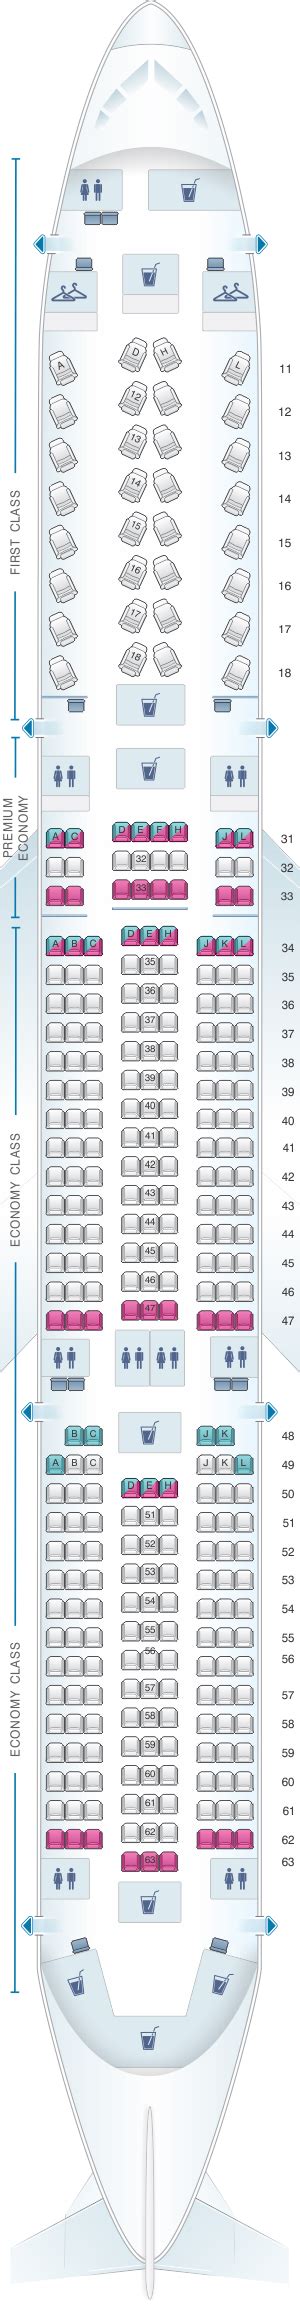 Seat Map Air China Airbus A350 900 Seatmaestro